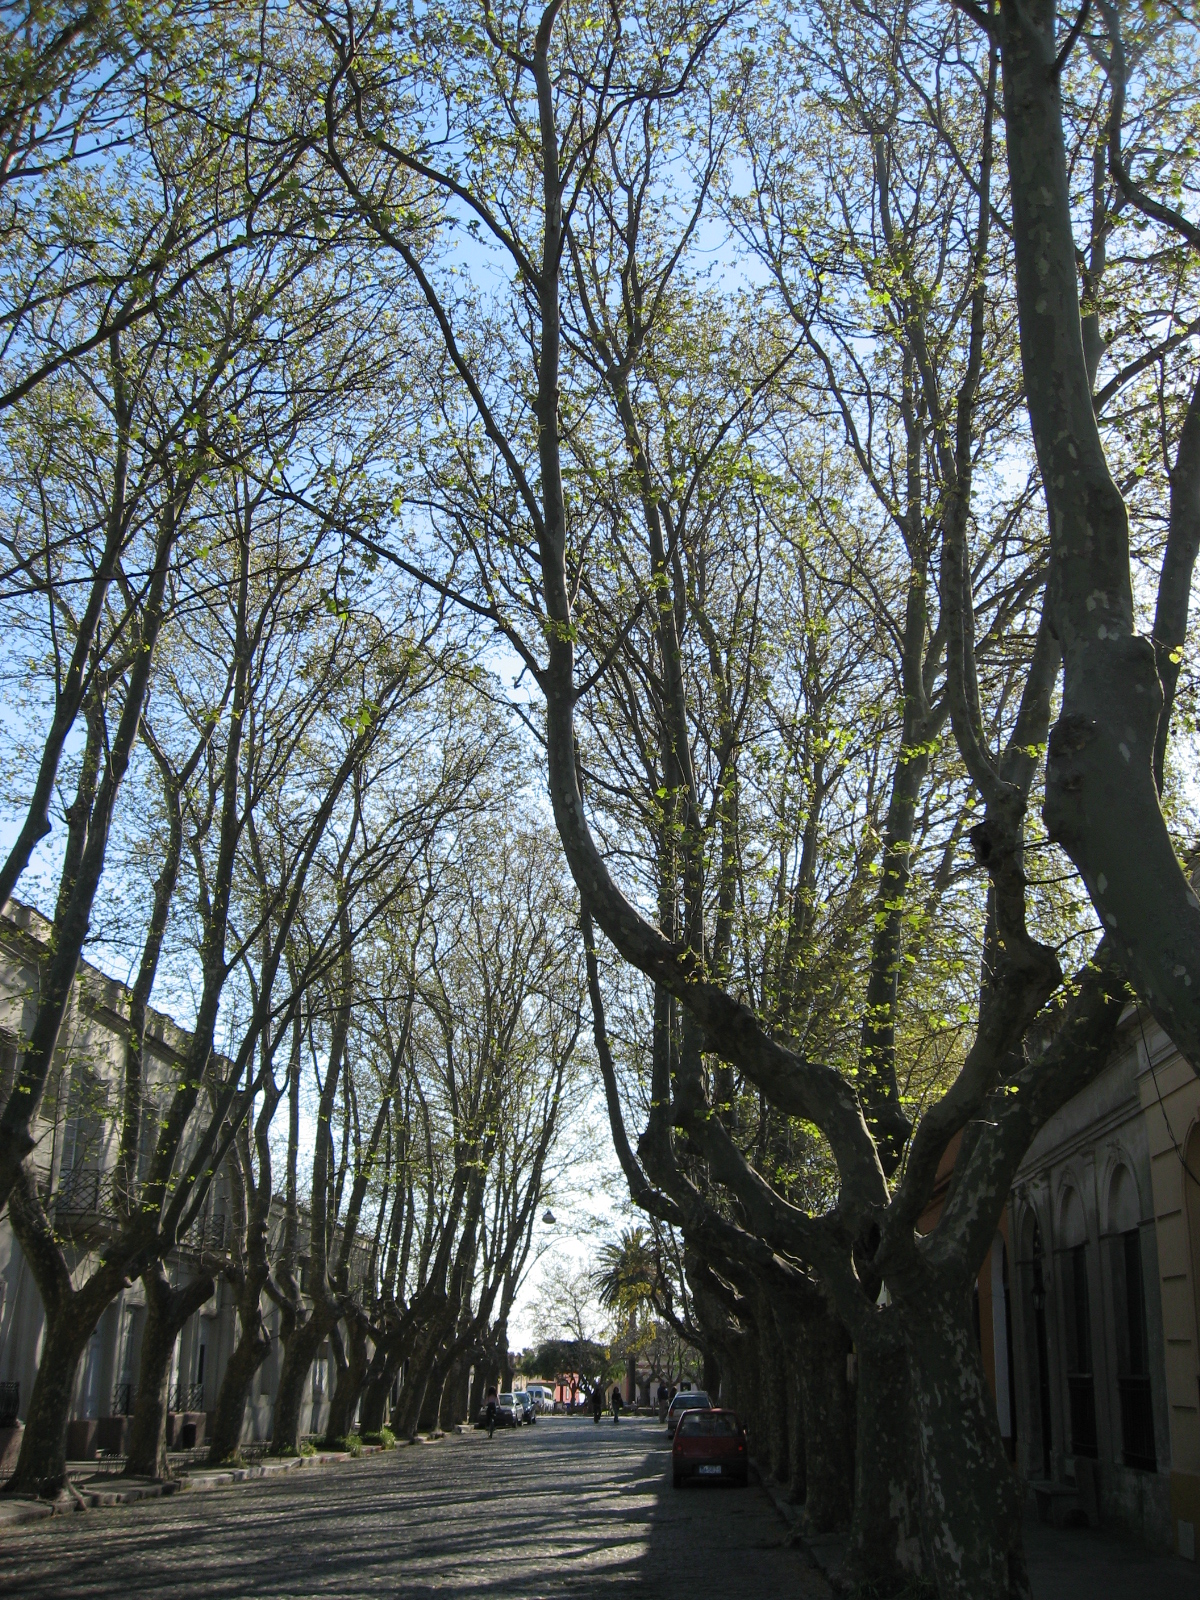 a tree lined street in a city with buildings